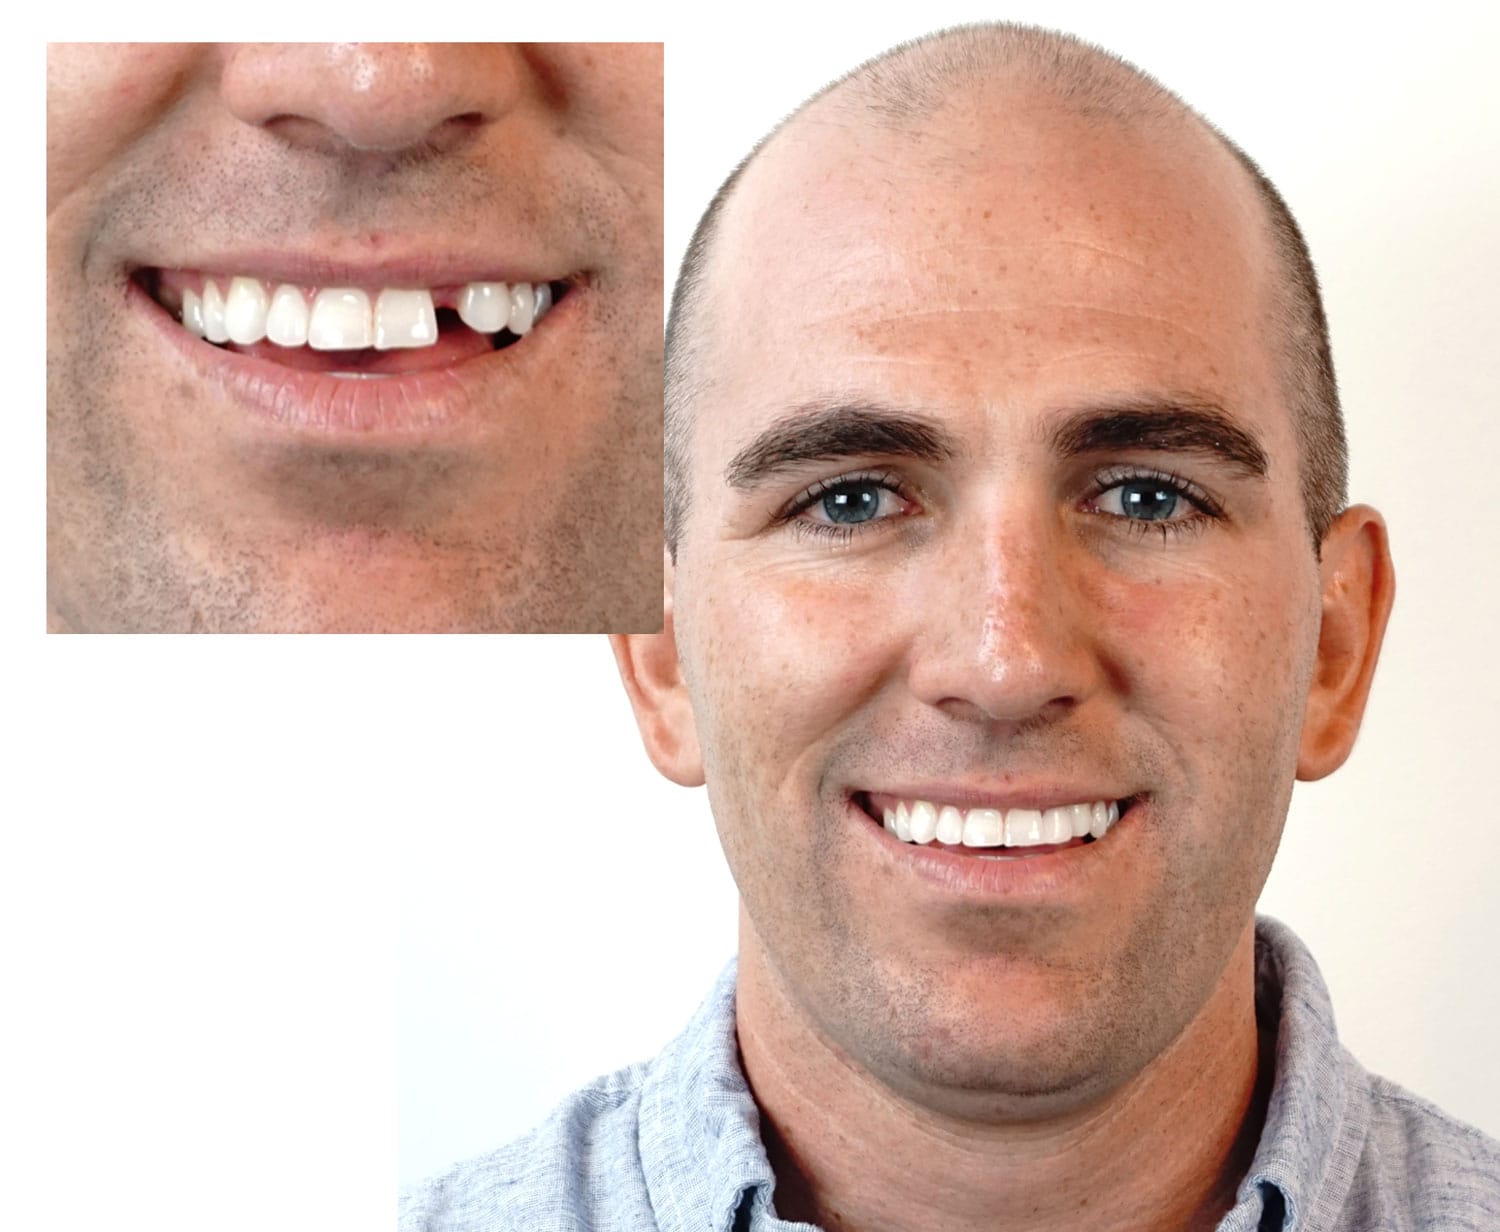 Instant Smile Triple Shade Temporary Tooth Kit - Replace A Missing Tooth in  Just 5 Minutes!